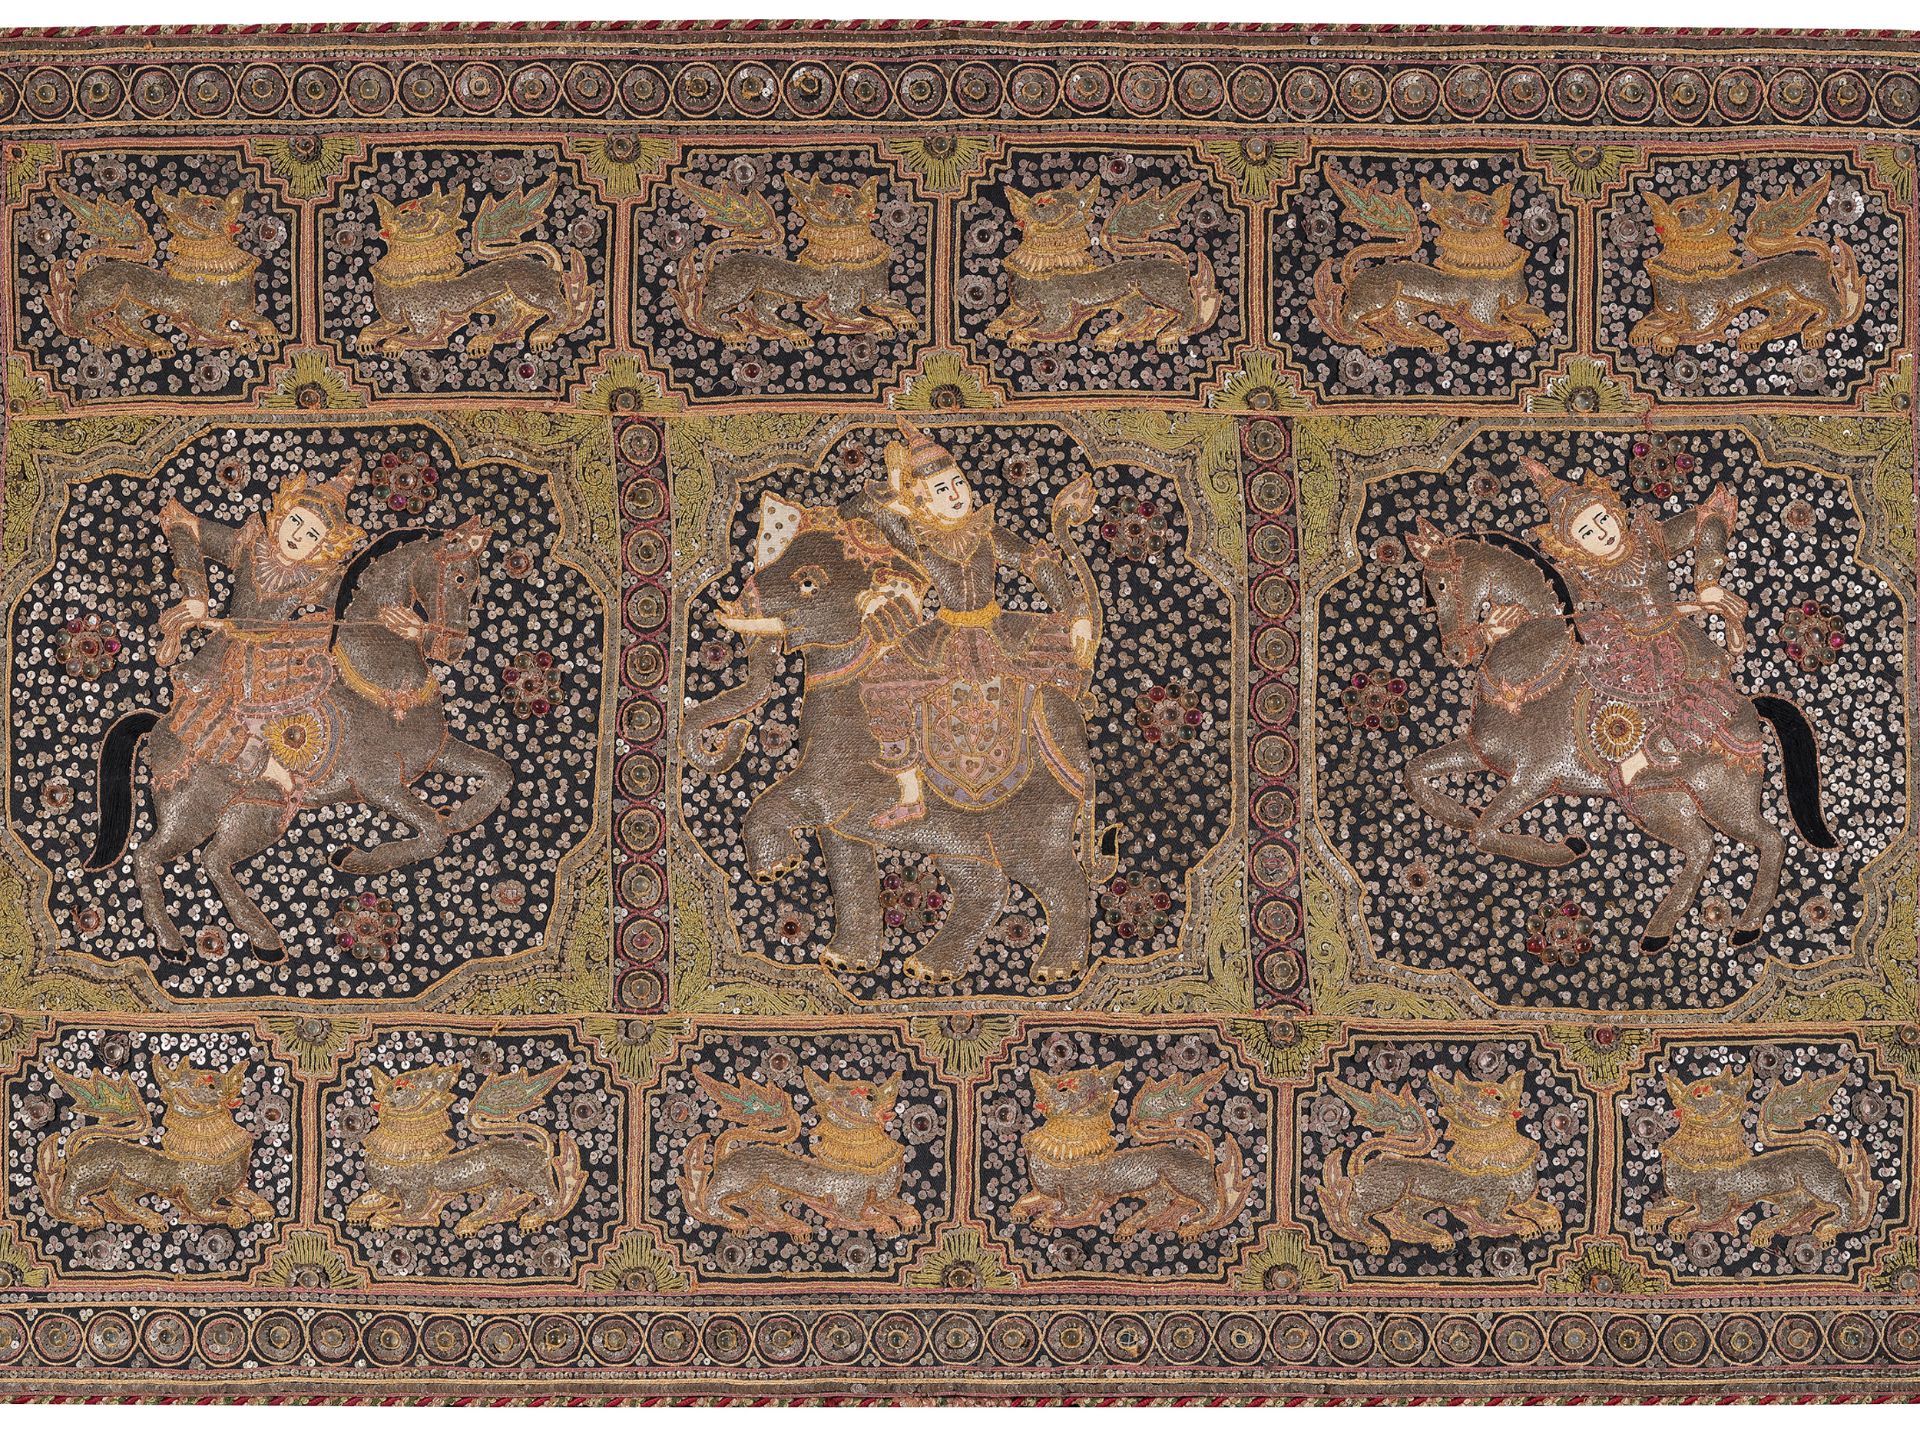 Thailand, 
Ca. 1950, 
Sequin embroidery in relief